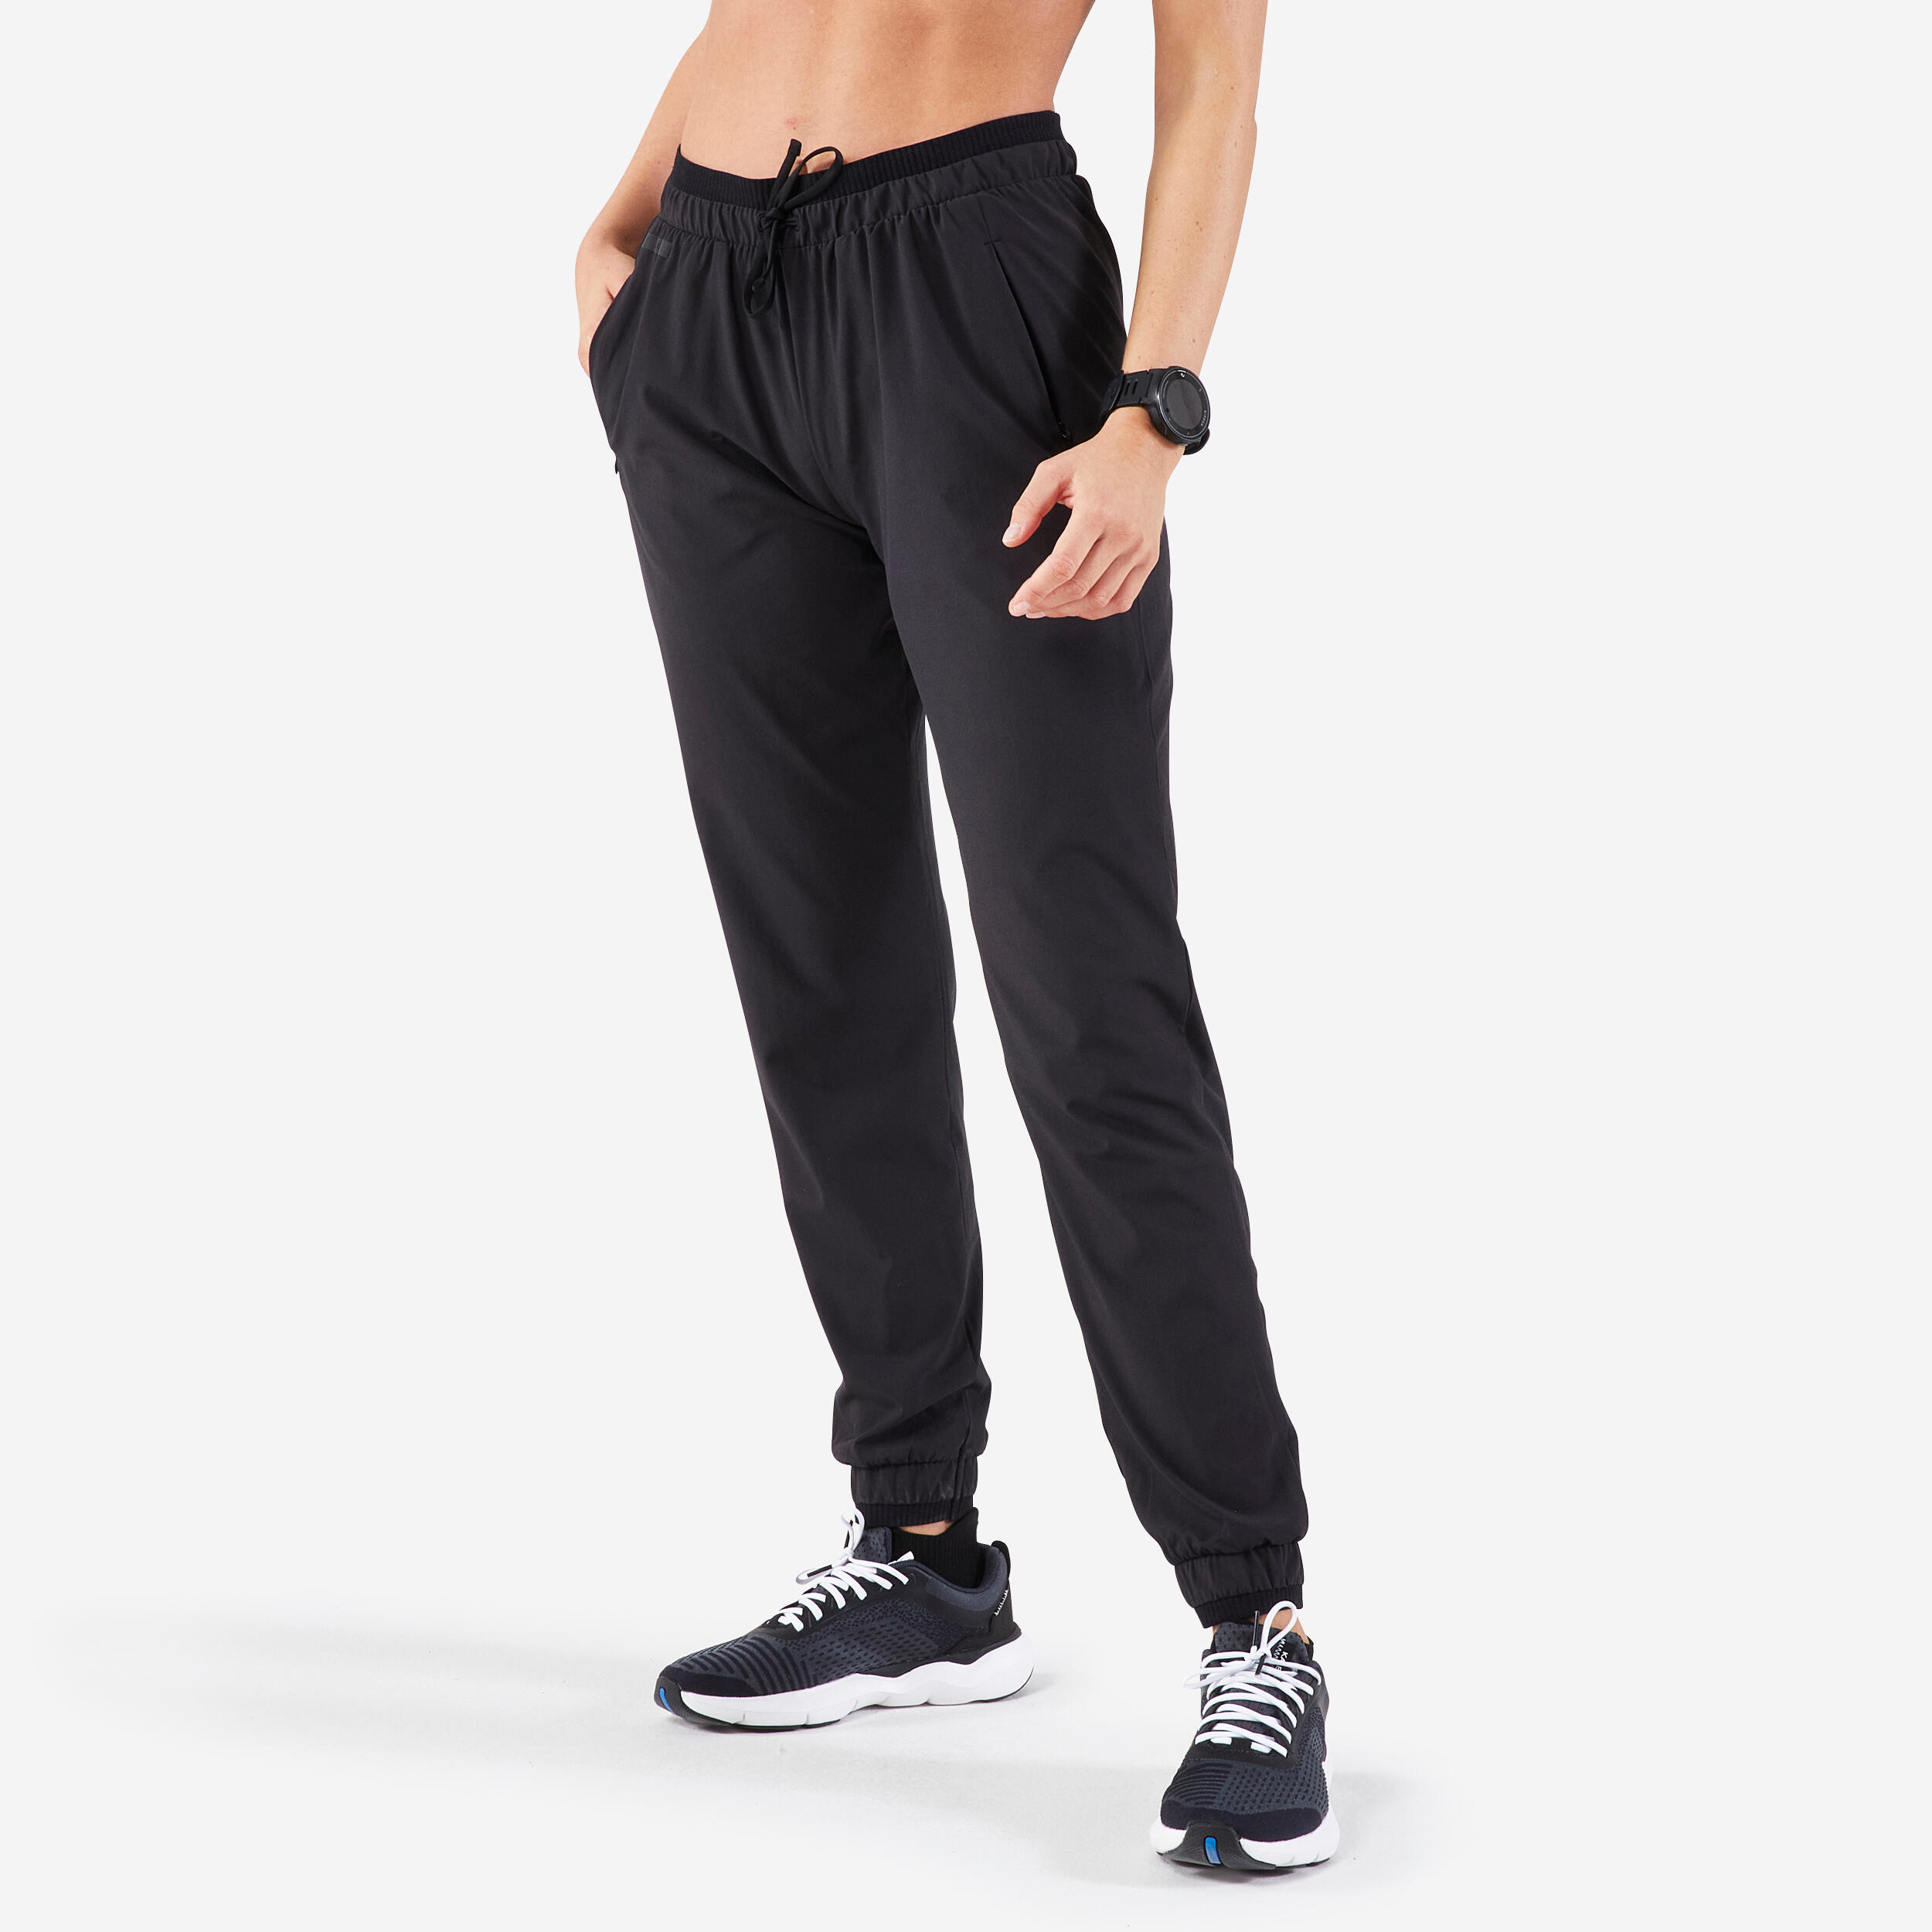 Skin Fitting Pant For Men and Women - Trouser Jogger Tights Sports Gym and  Cycling Running Pants For Men and Women